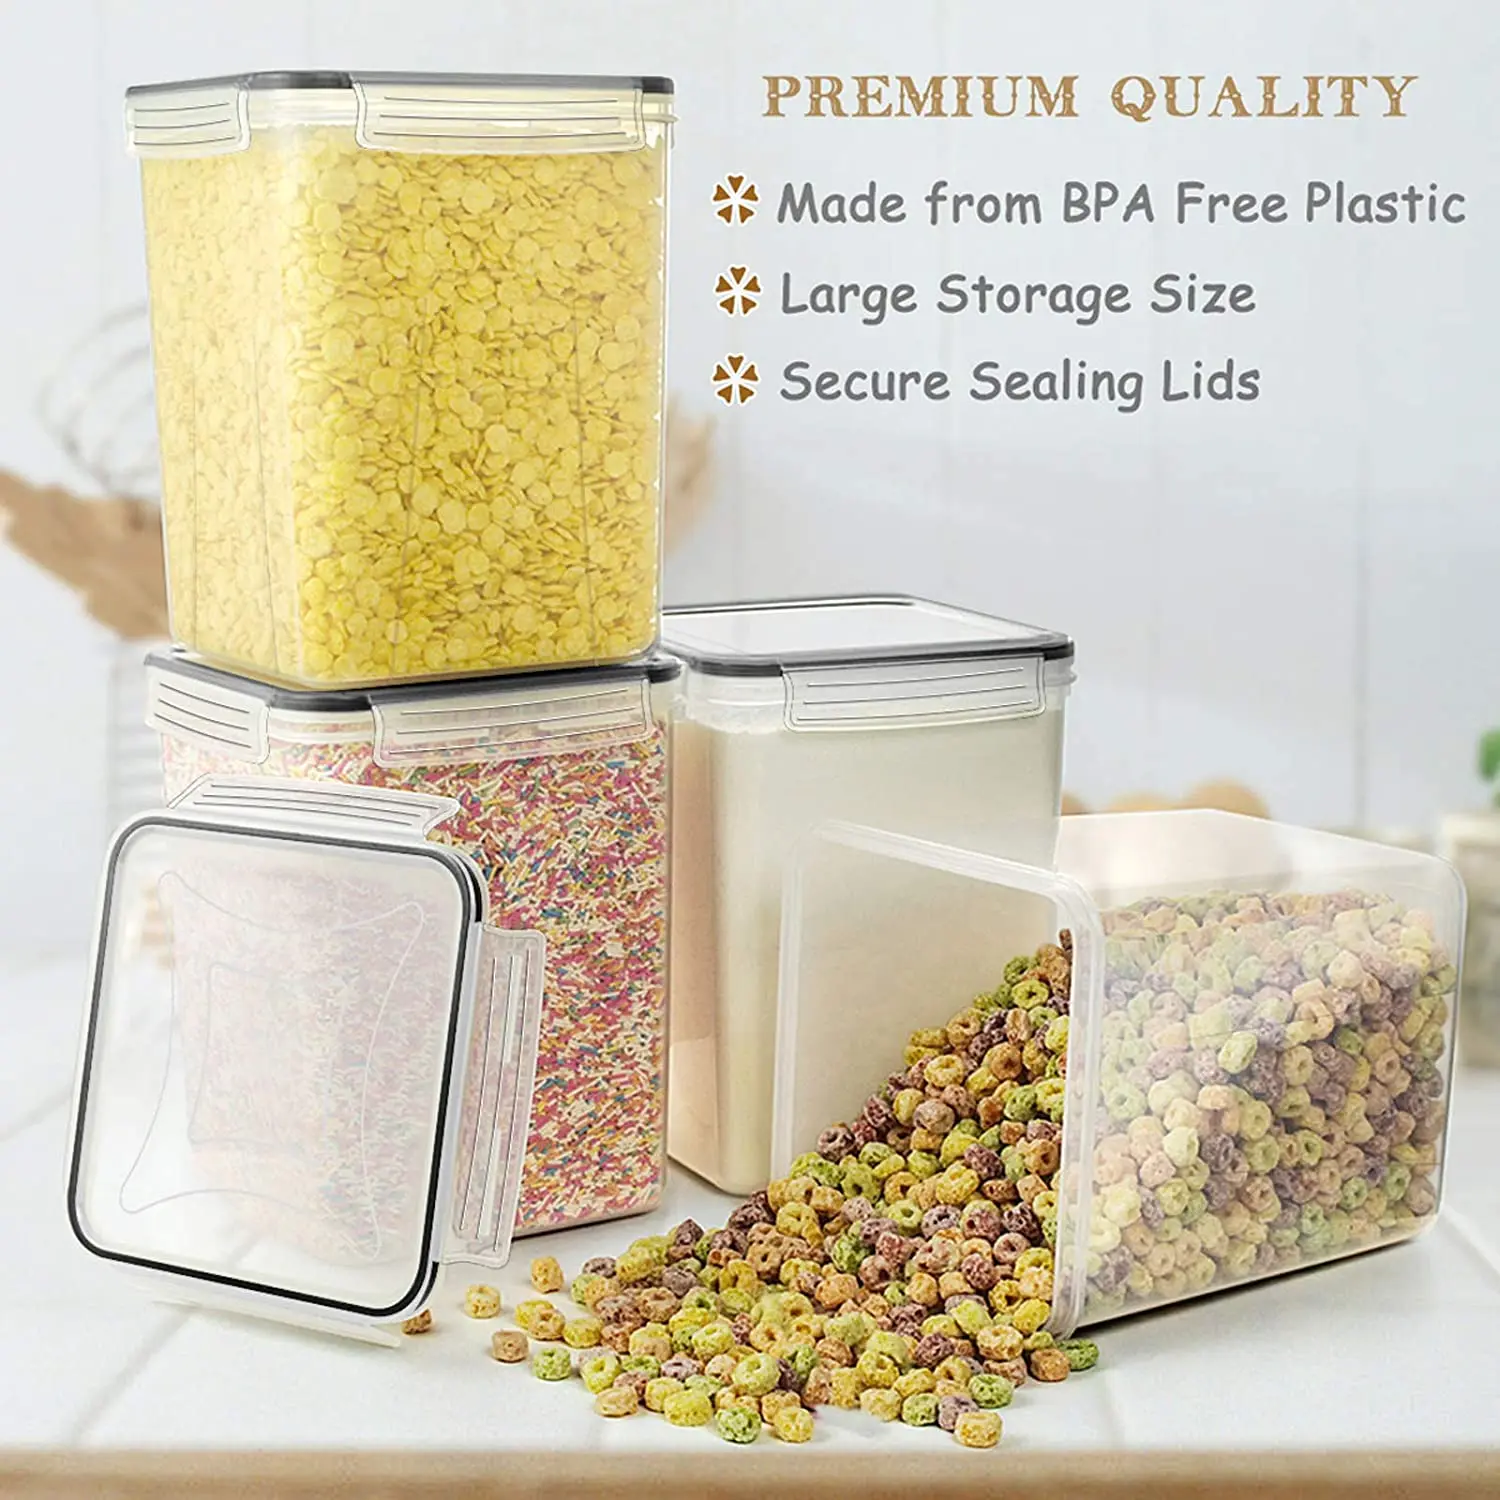 Large Food Storage Containers 5.2L /175oz, 4 Piece BPA Free